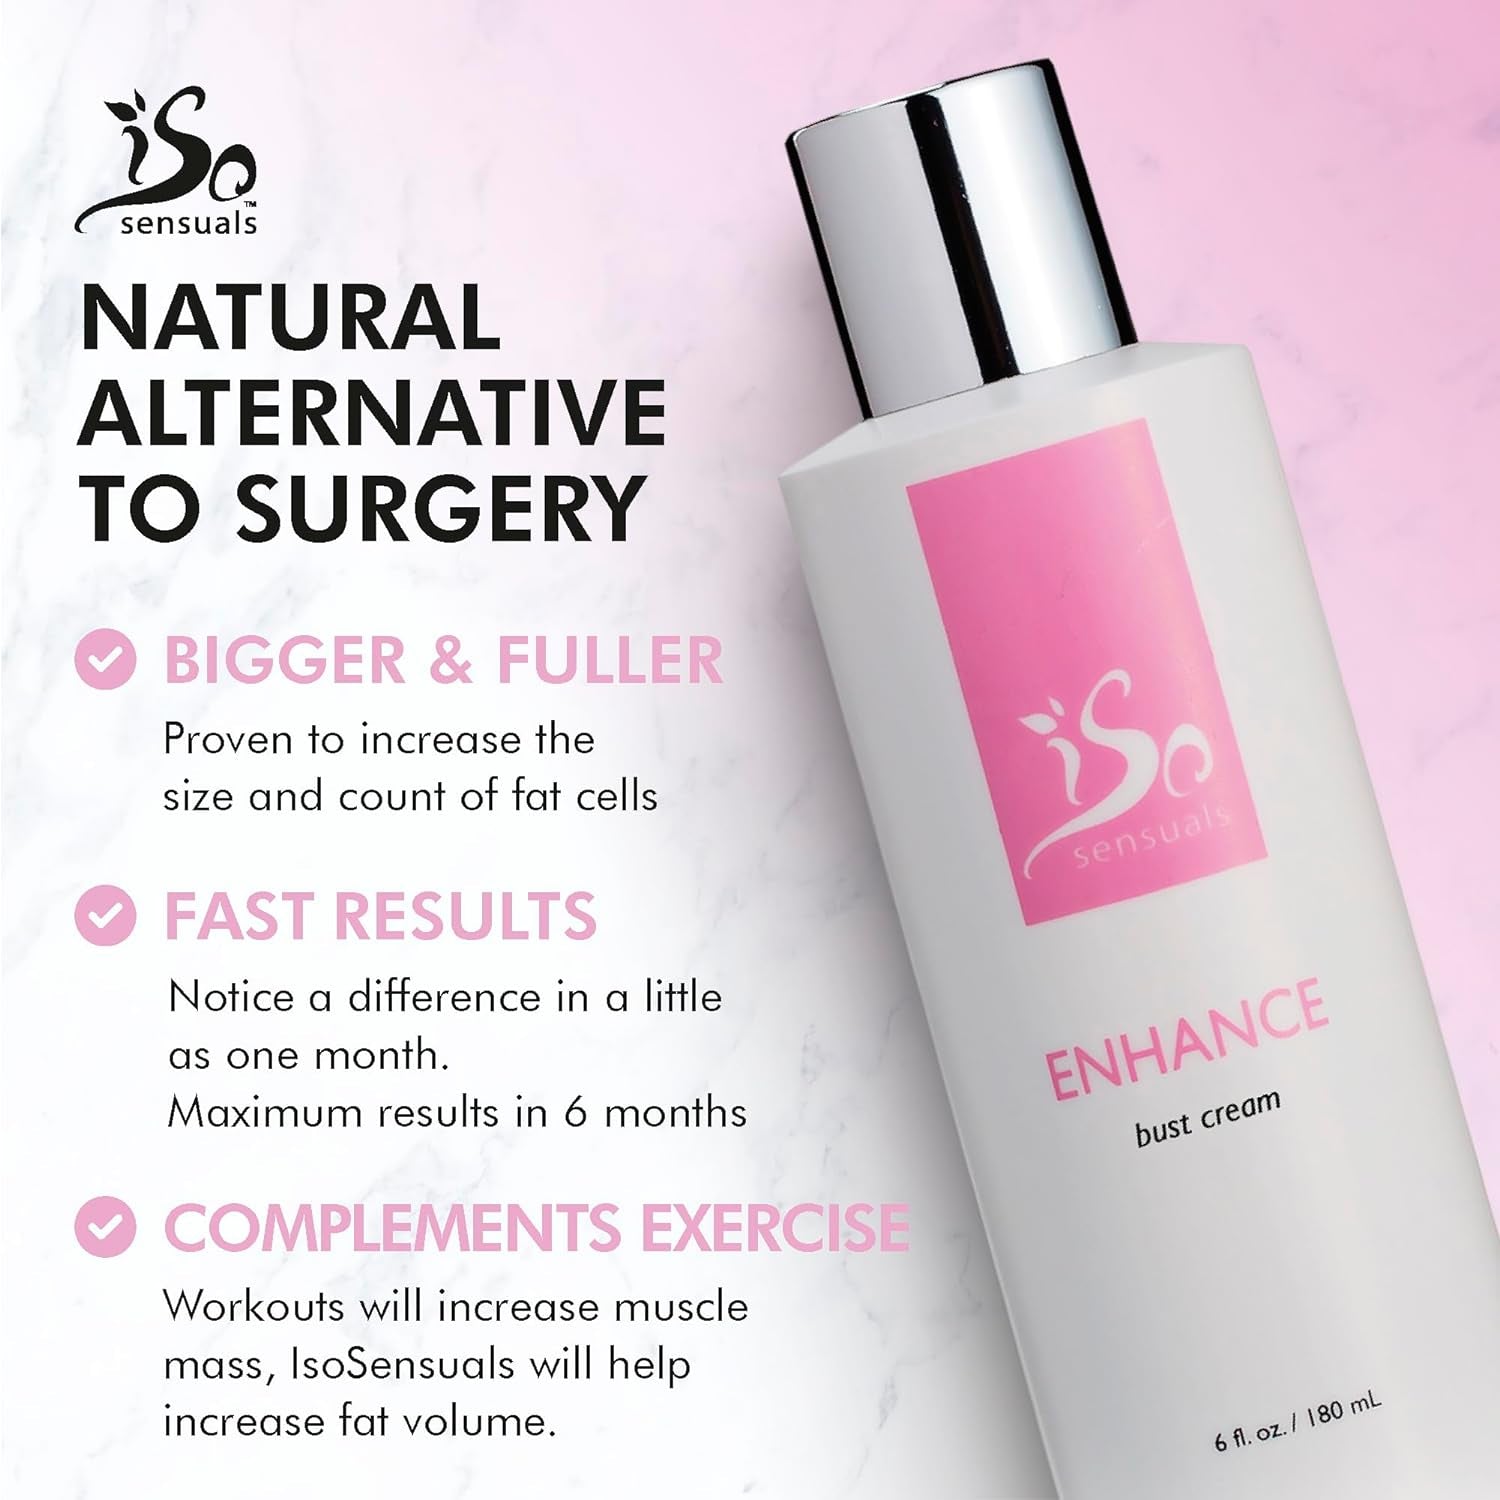 ENHANCE - Rapid-Action Breast Enlargement Cream for Quick Growth - Lifting and Firming Breast Enhancement Cream with Voluplus - Generous 2 Month Supply